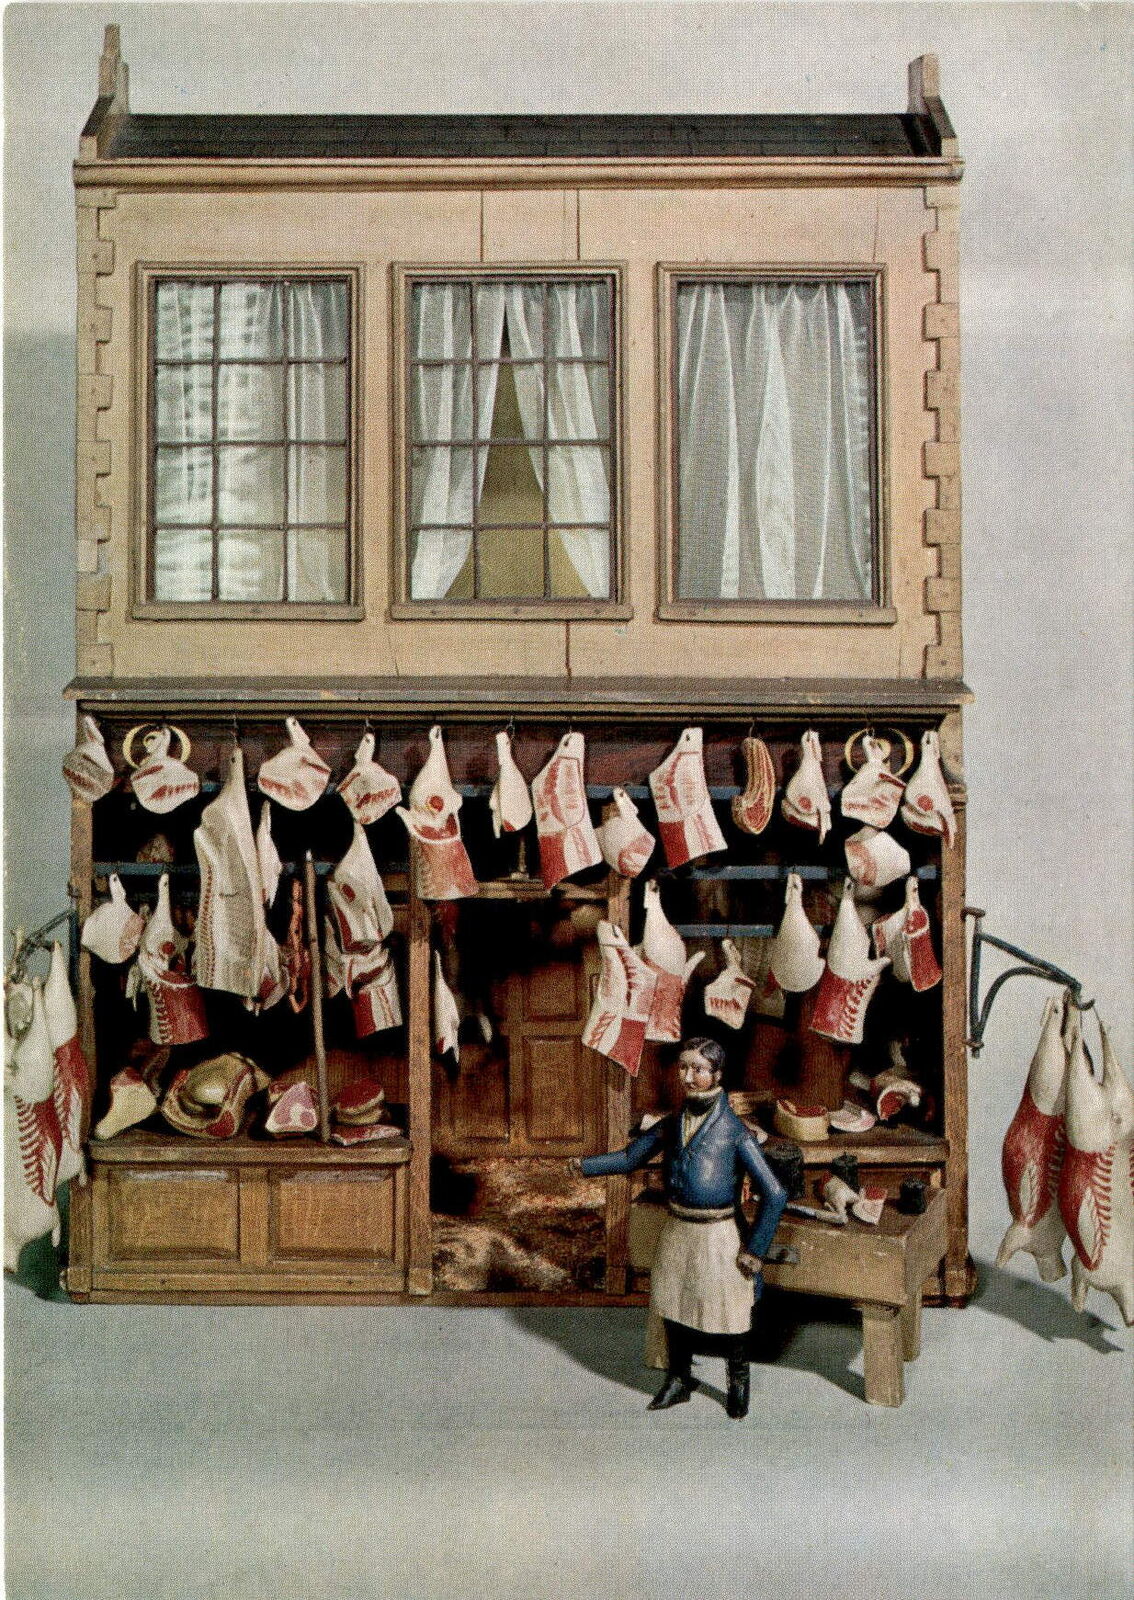 Antique English butcher\'s shop model from 1840.